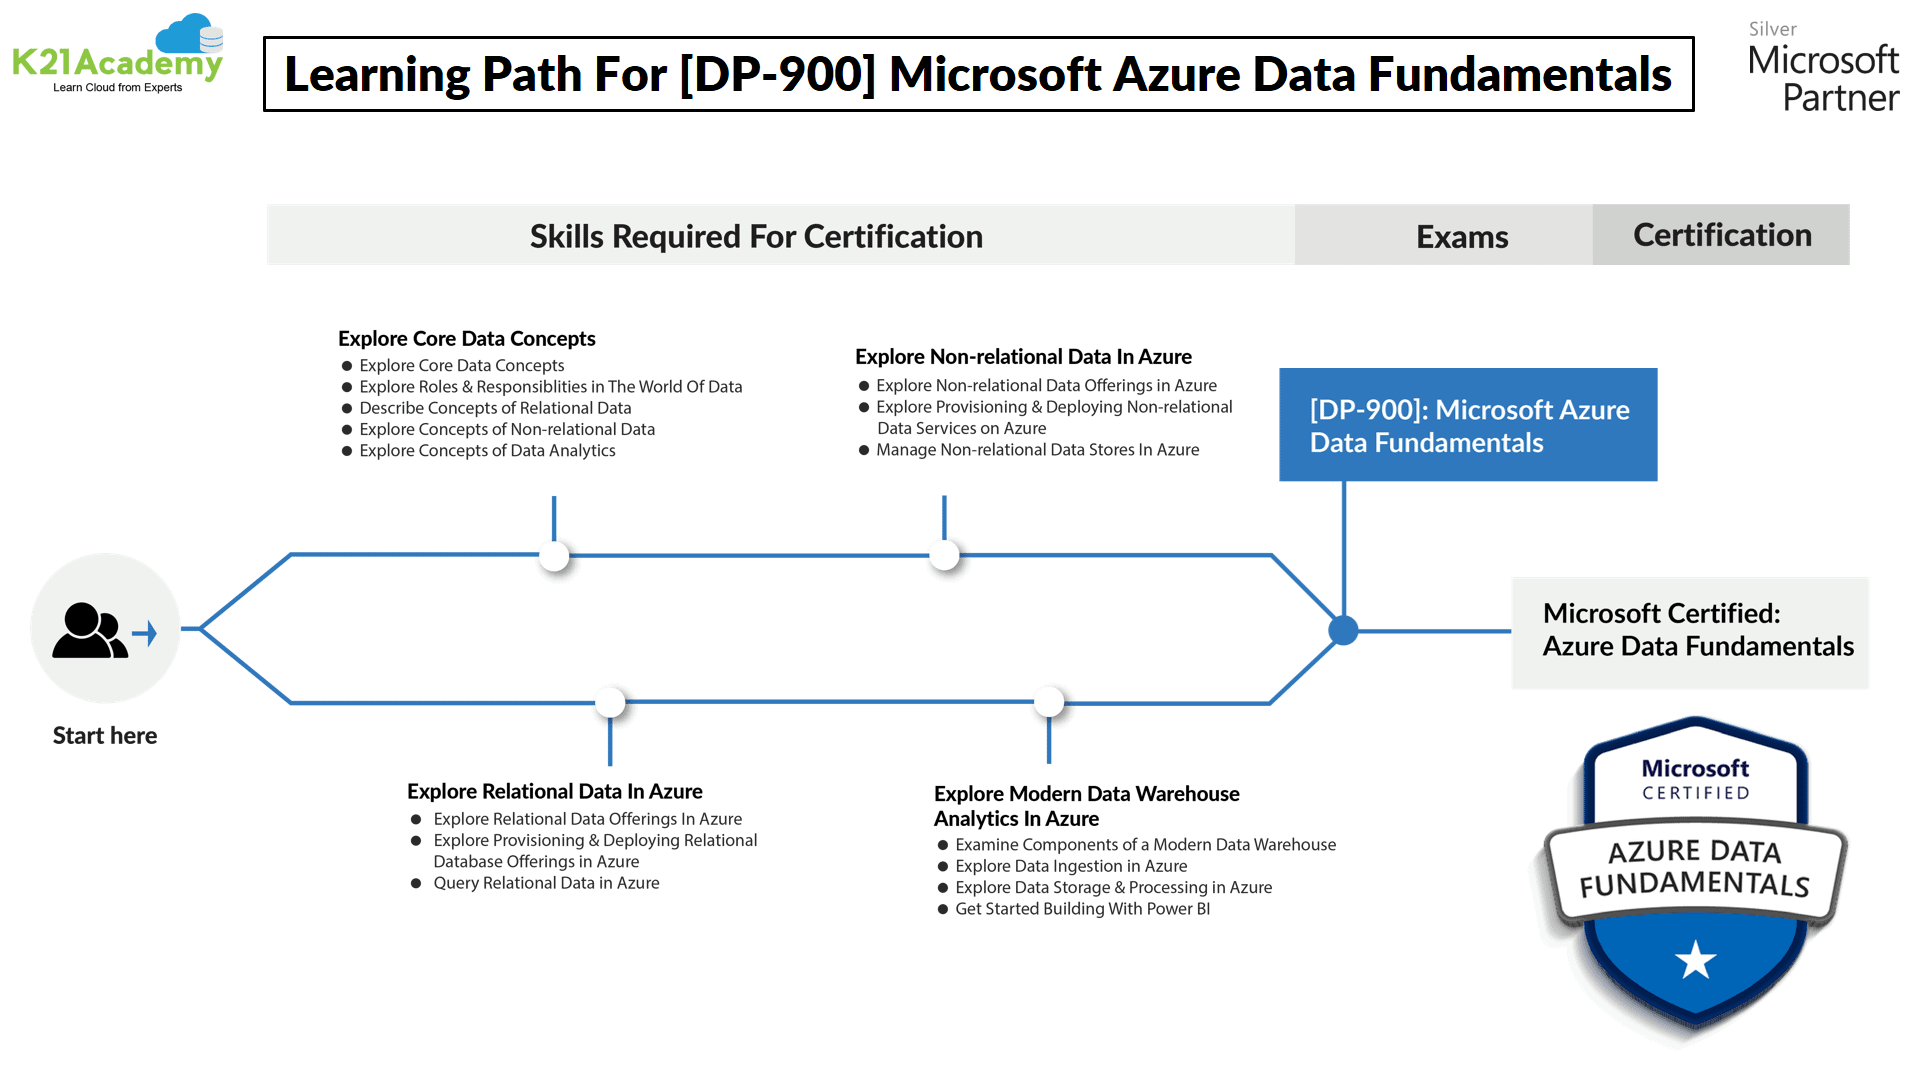 DP-900 Learning path